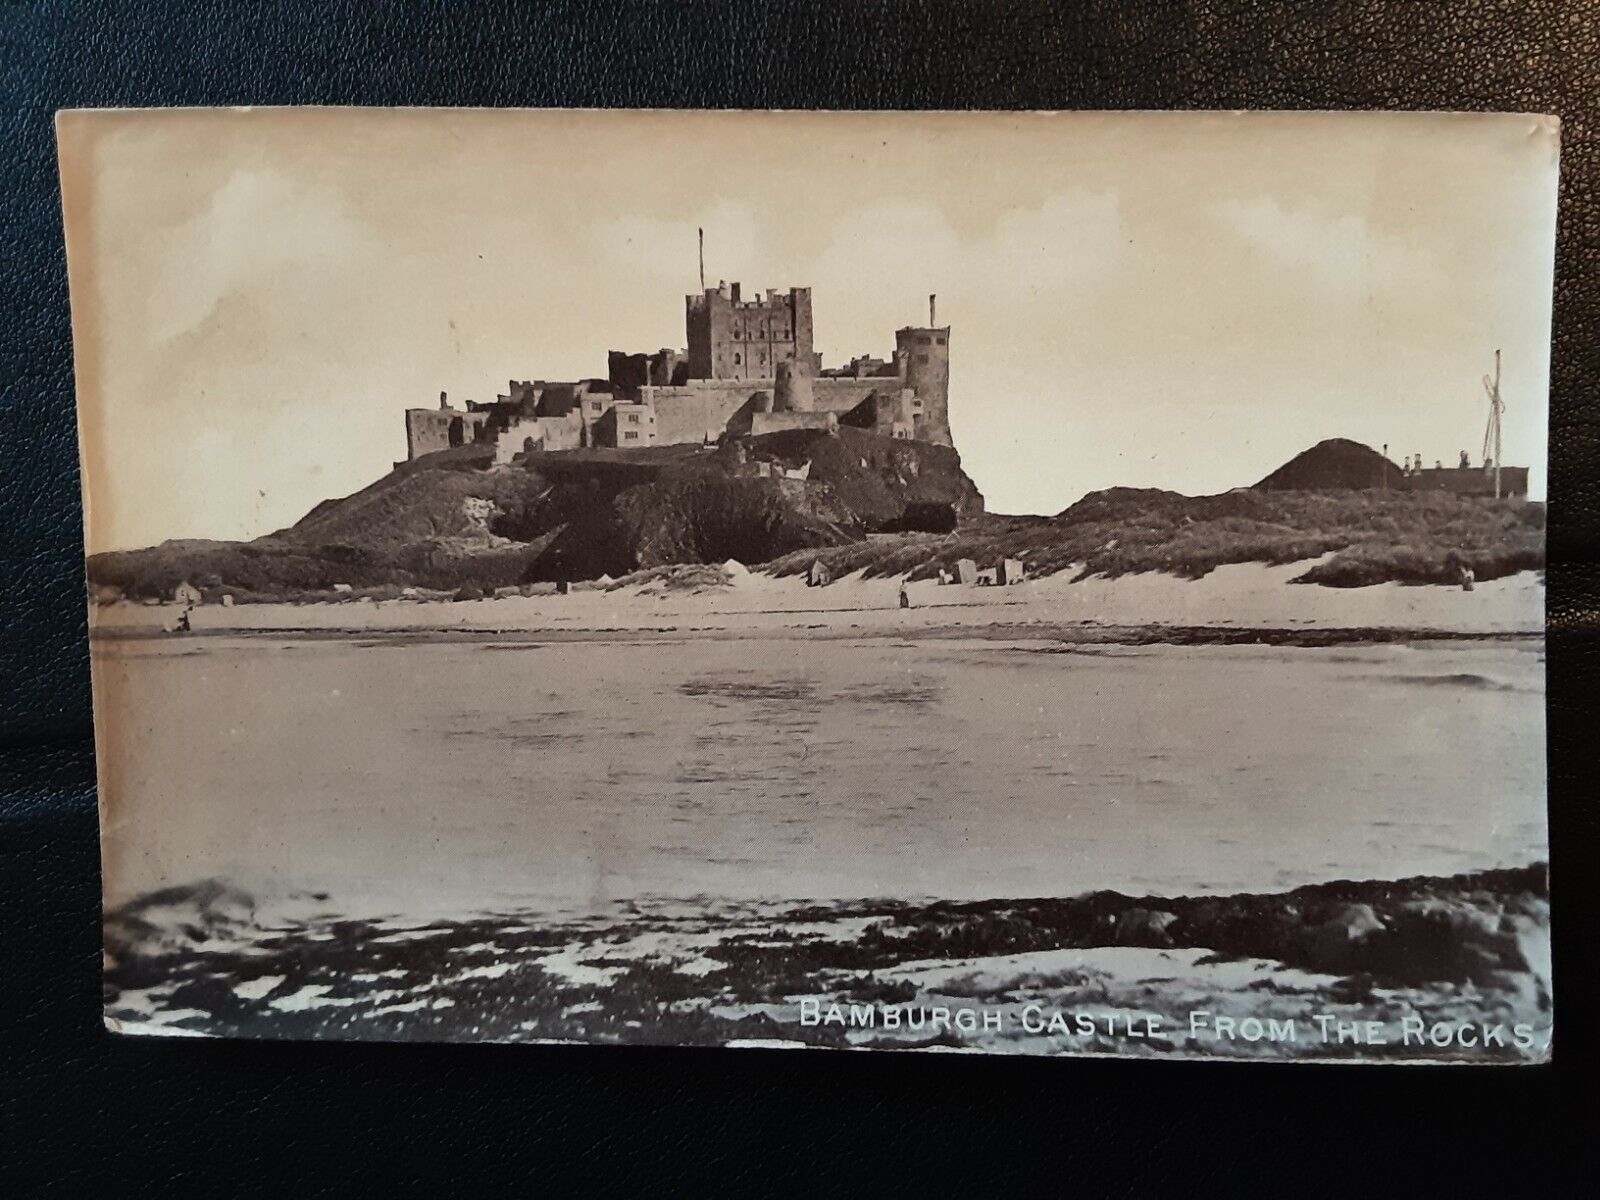 Old Graham's service of Bamburgh Castle, Northumberland posted 1917